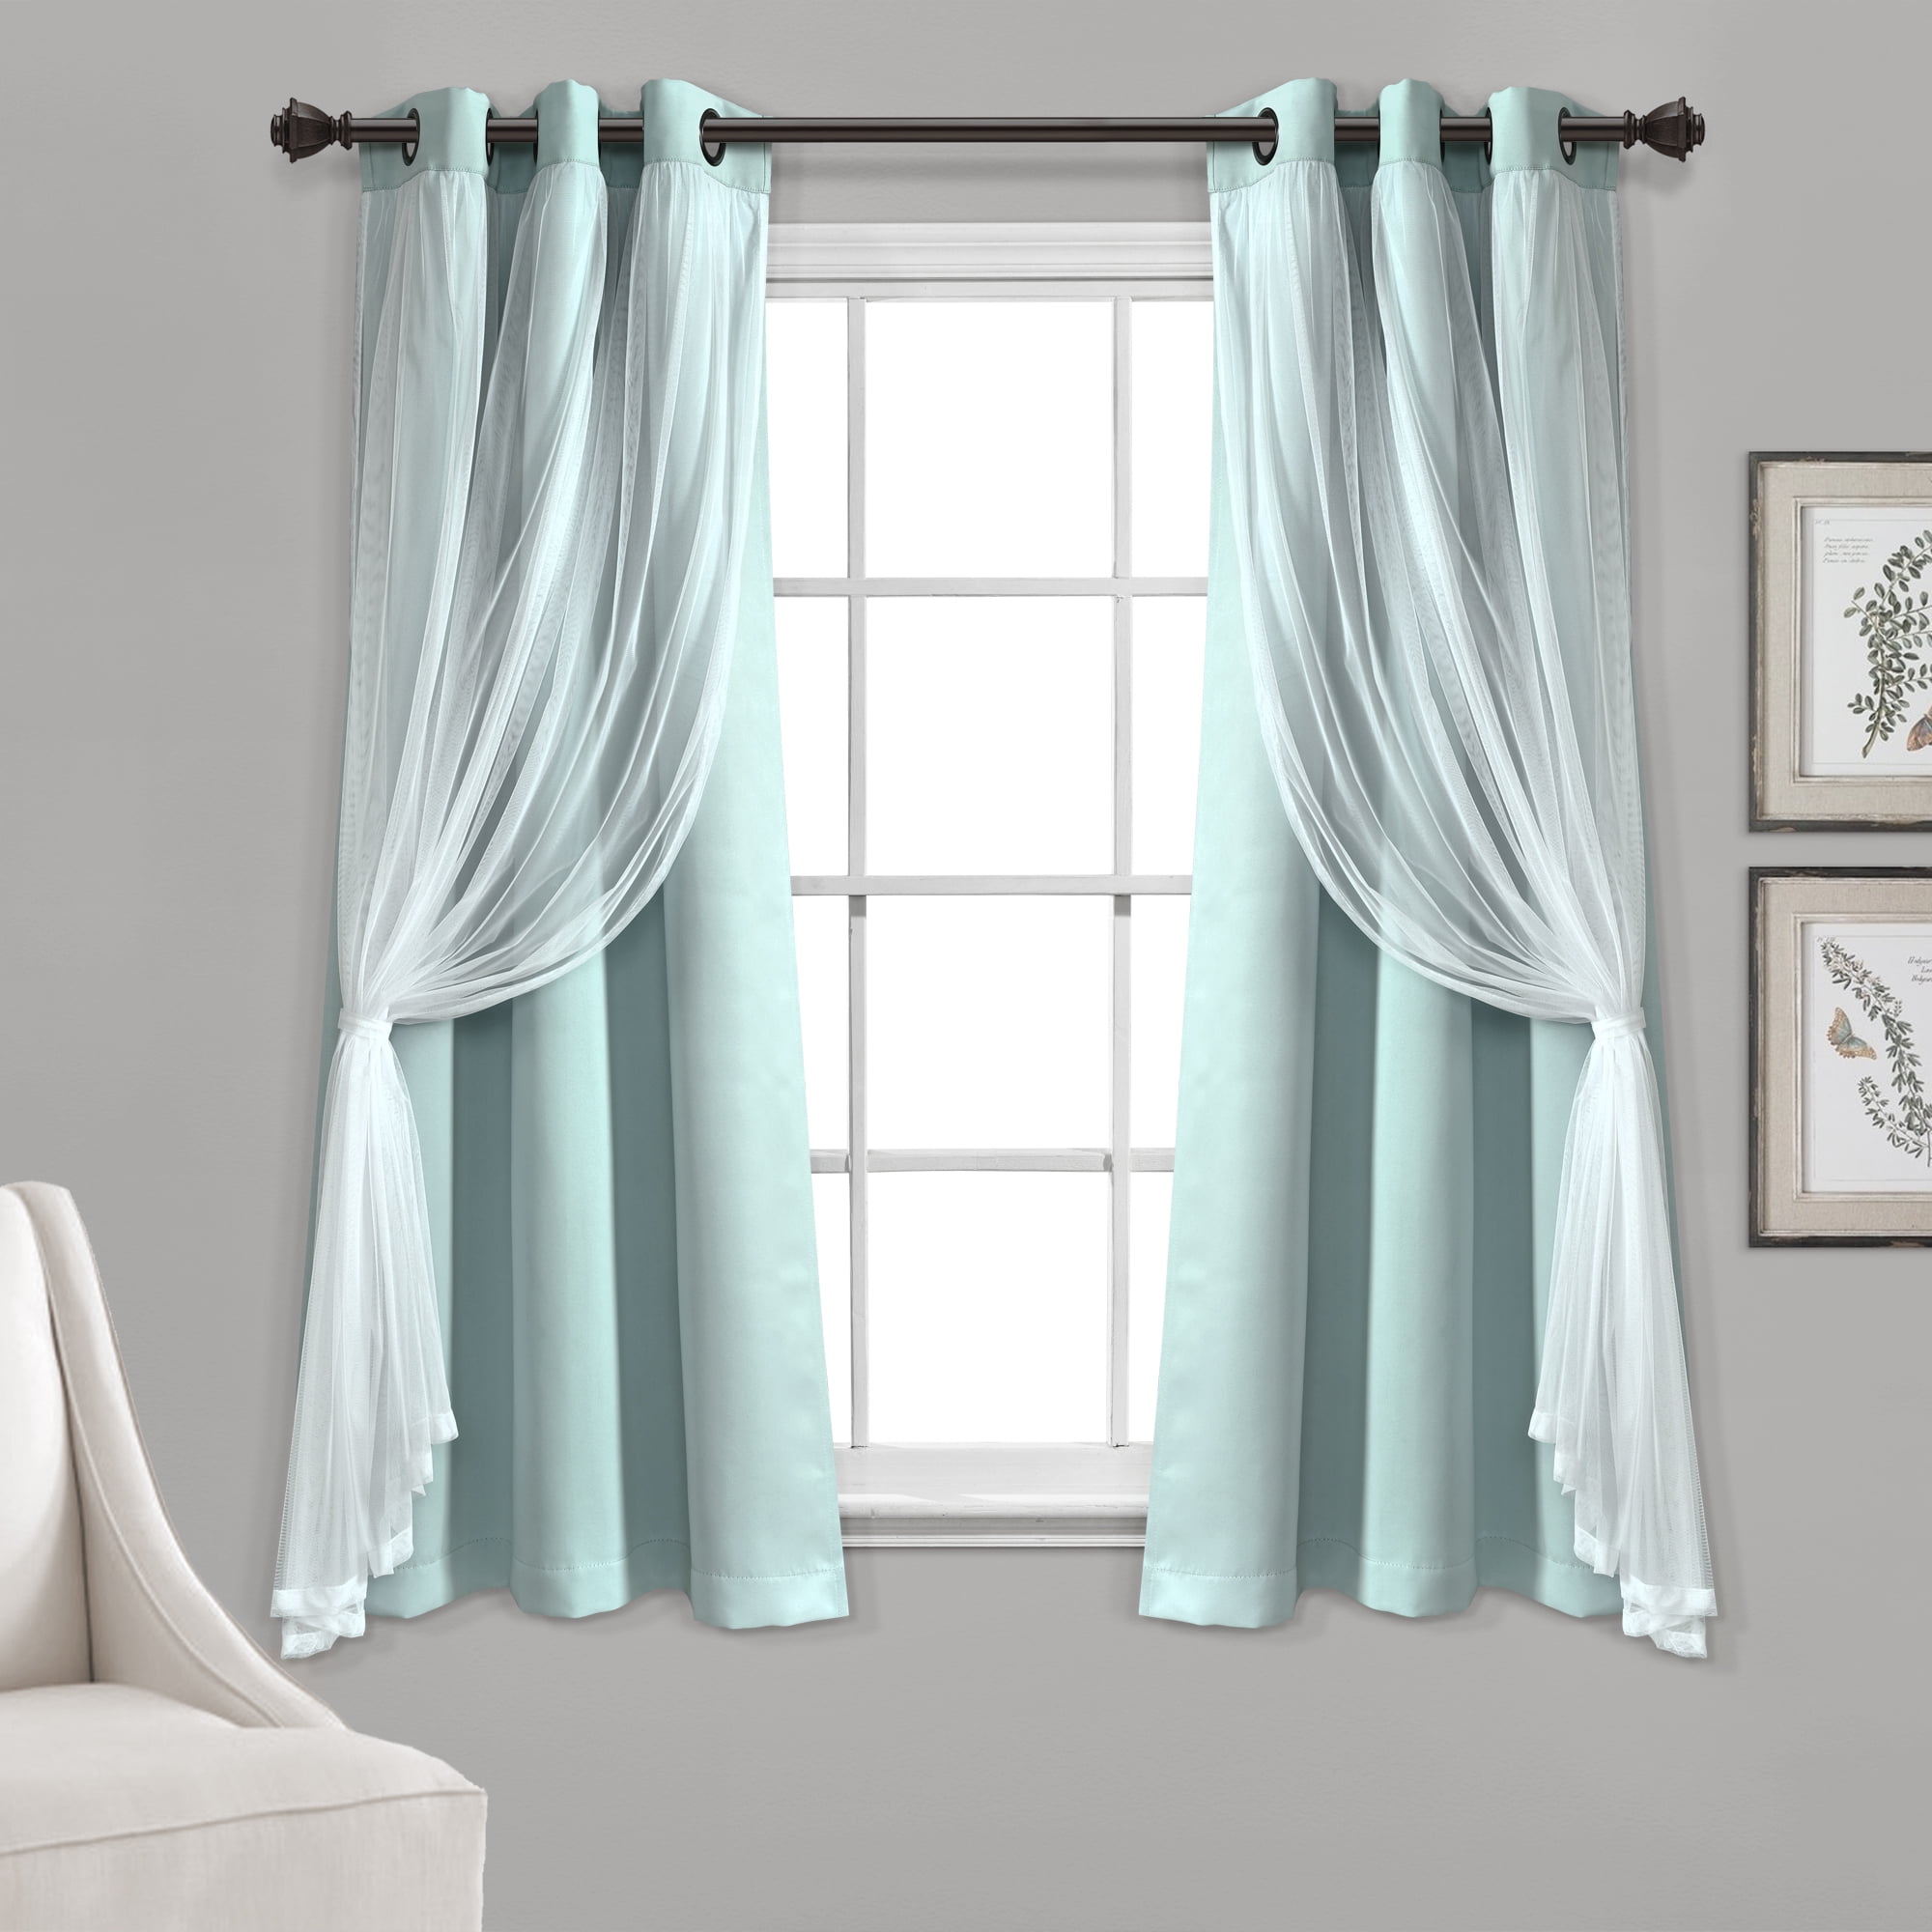 Details about   Cartoon Hero Window Curtains 2 Panels Decorative Curtain Drapes with Grommets 